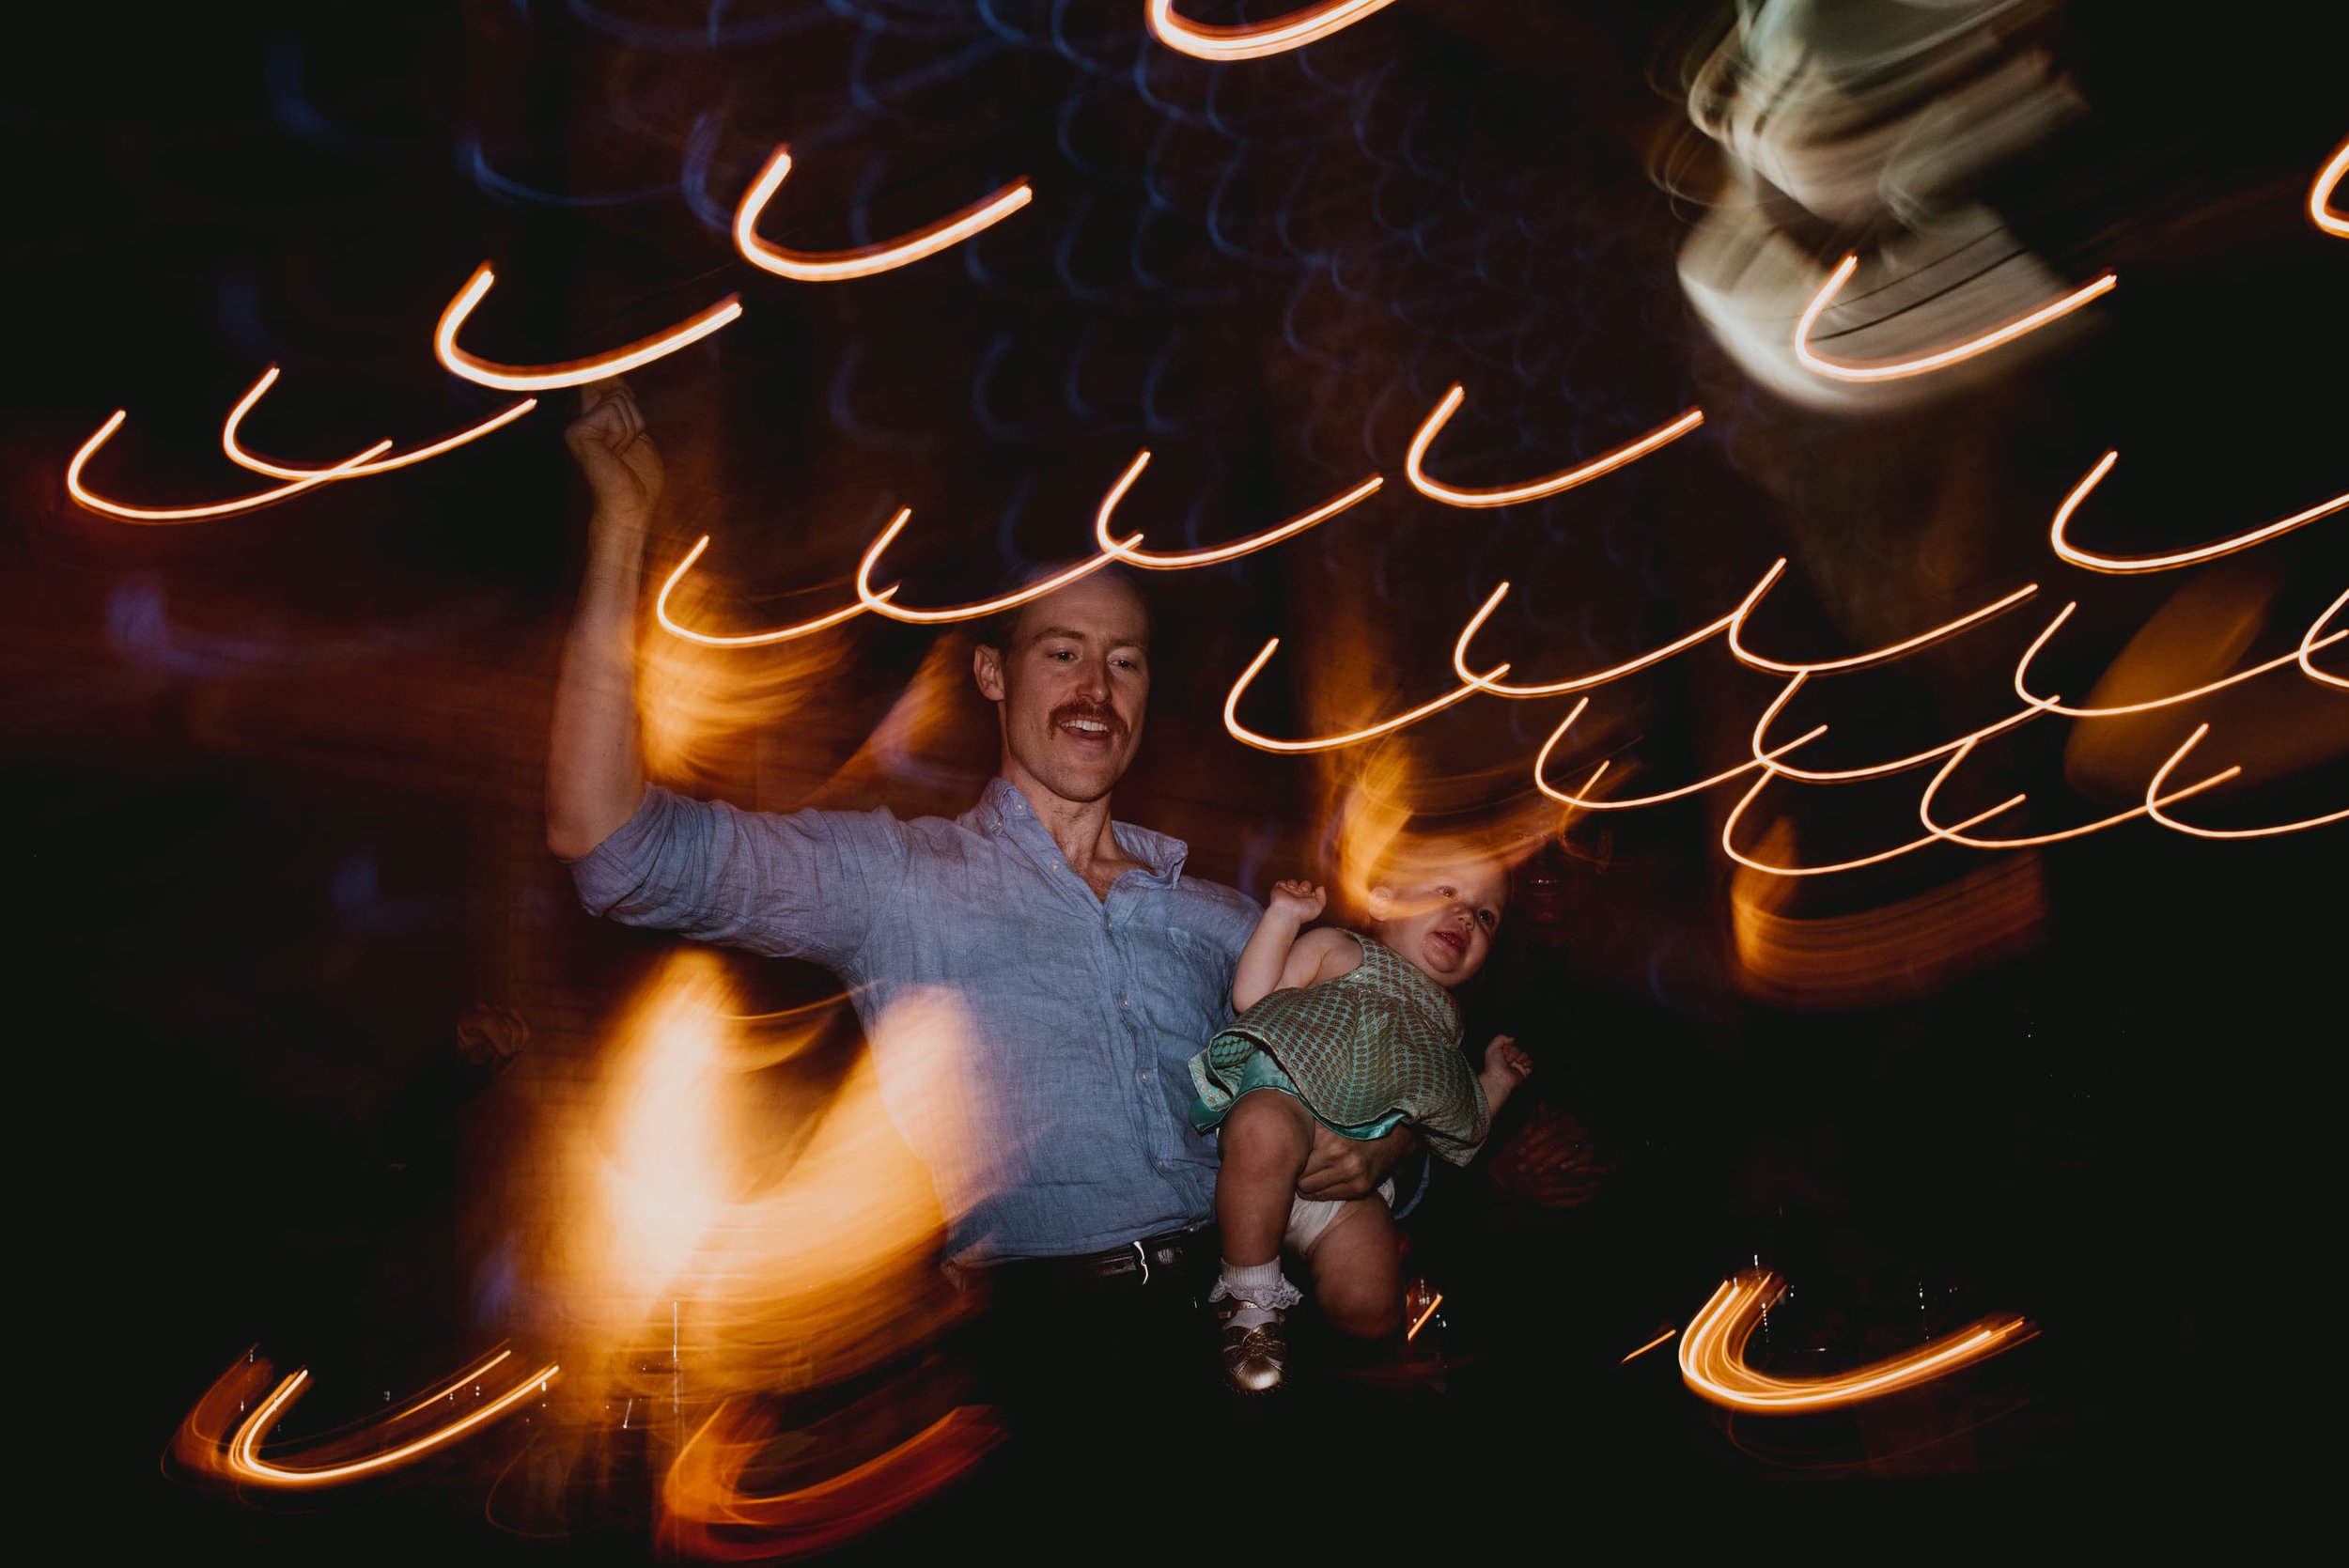 a wedding guest dancing with his infant during this haw river ballroom wedding reception